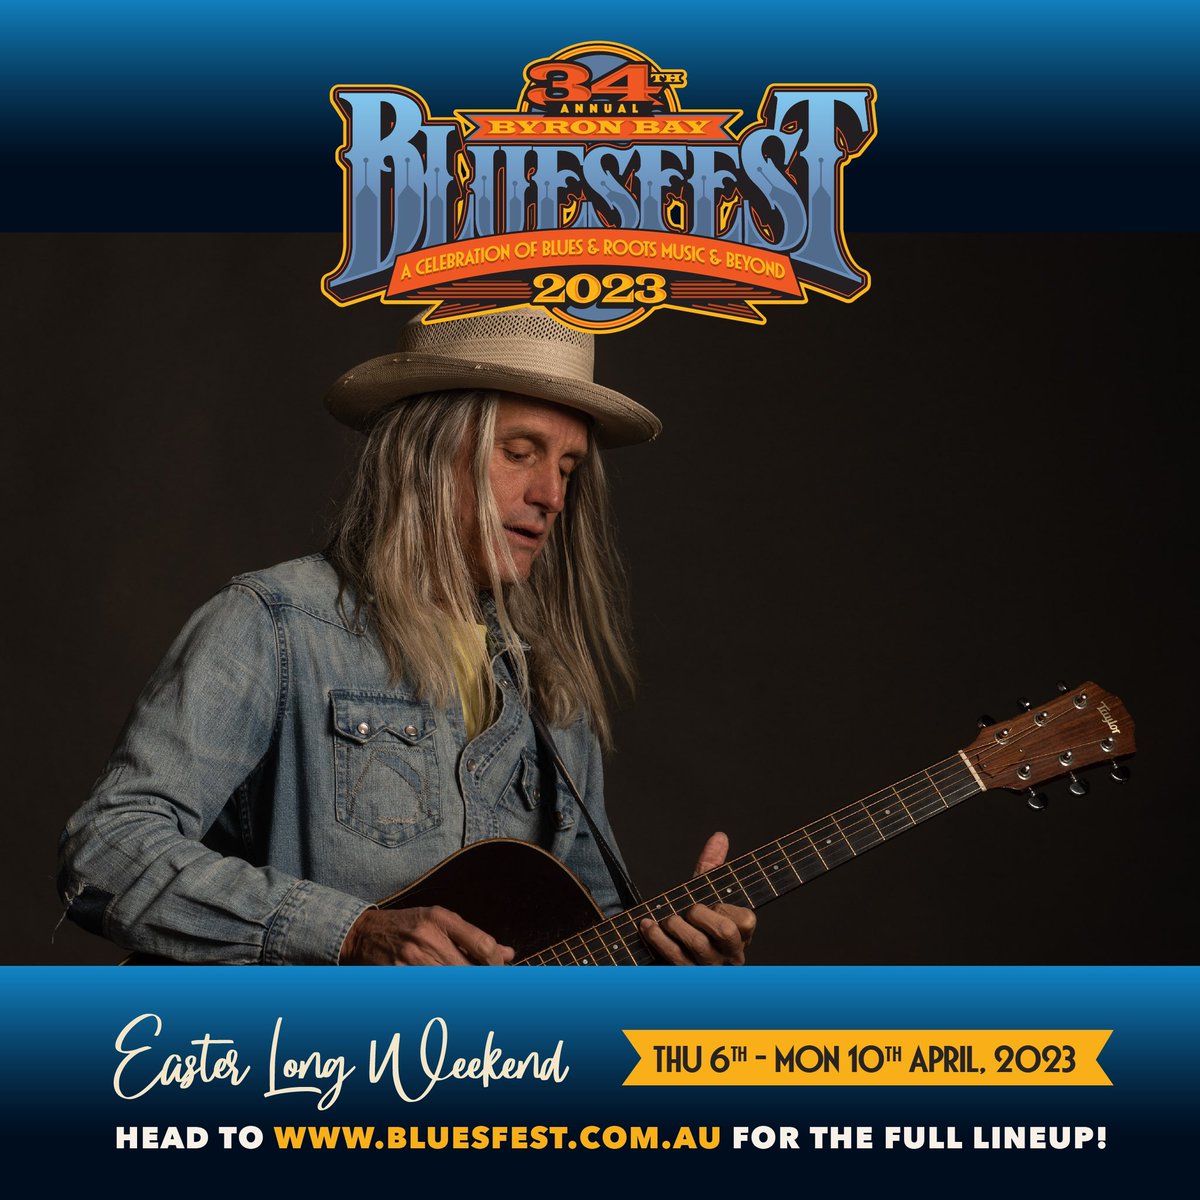 Super excited to announce this! Ill be playing @BluesfestByron and have extended my Australia tour. See ya Easter Weekend. Yippee!